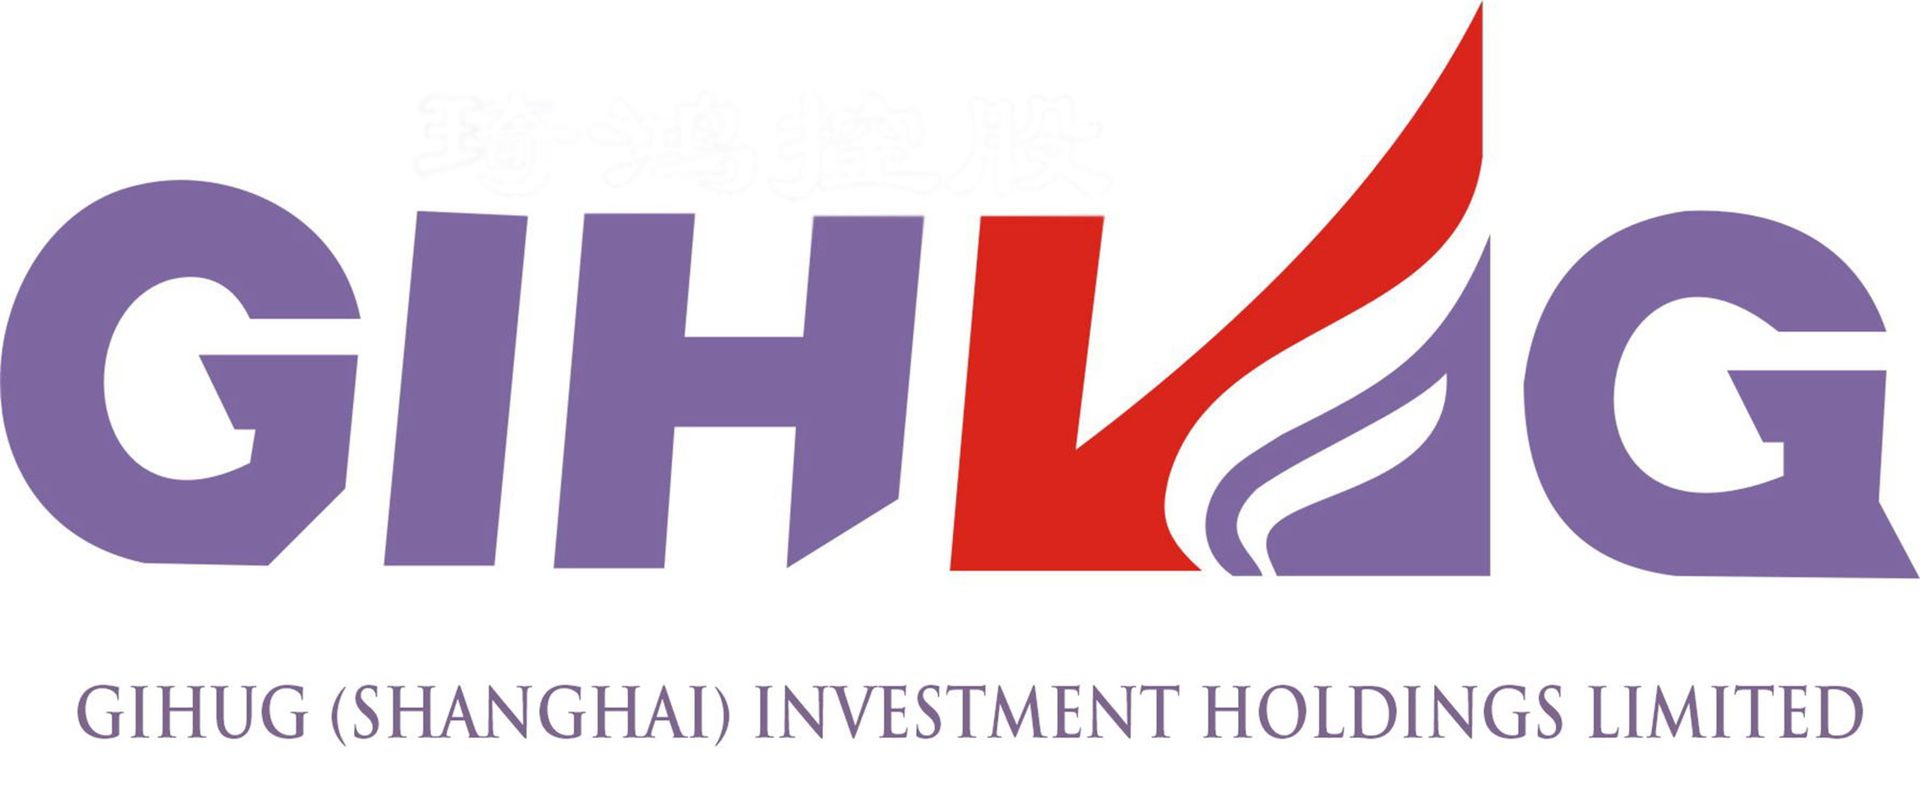 Gihug (shanghai) Investment Holdings Limited Main Image